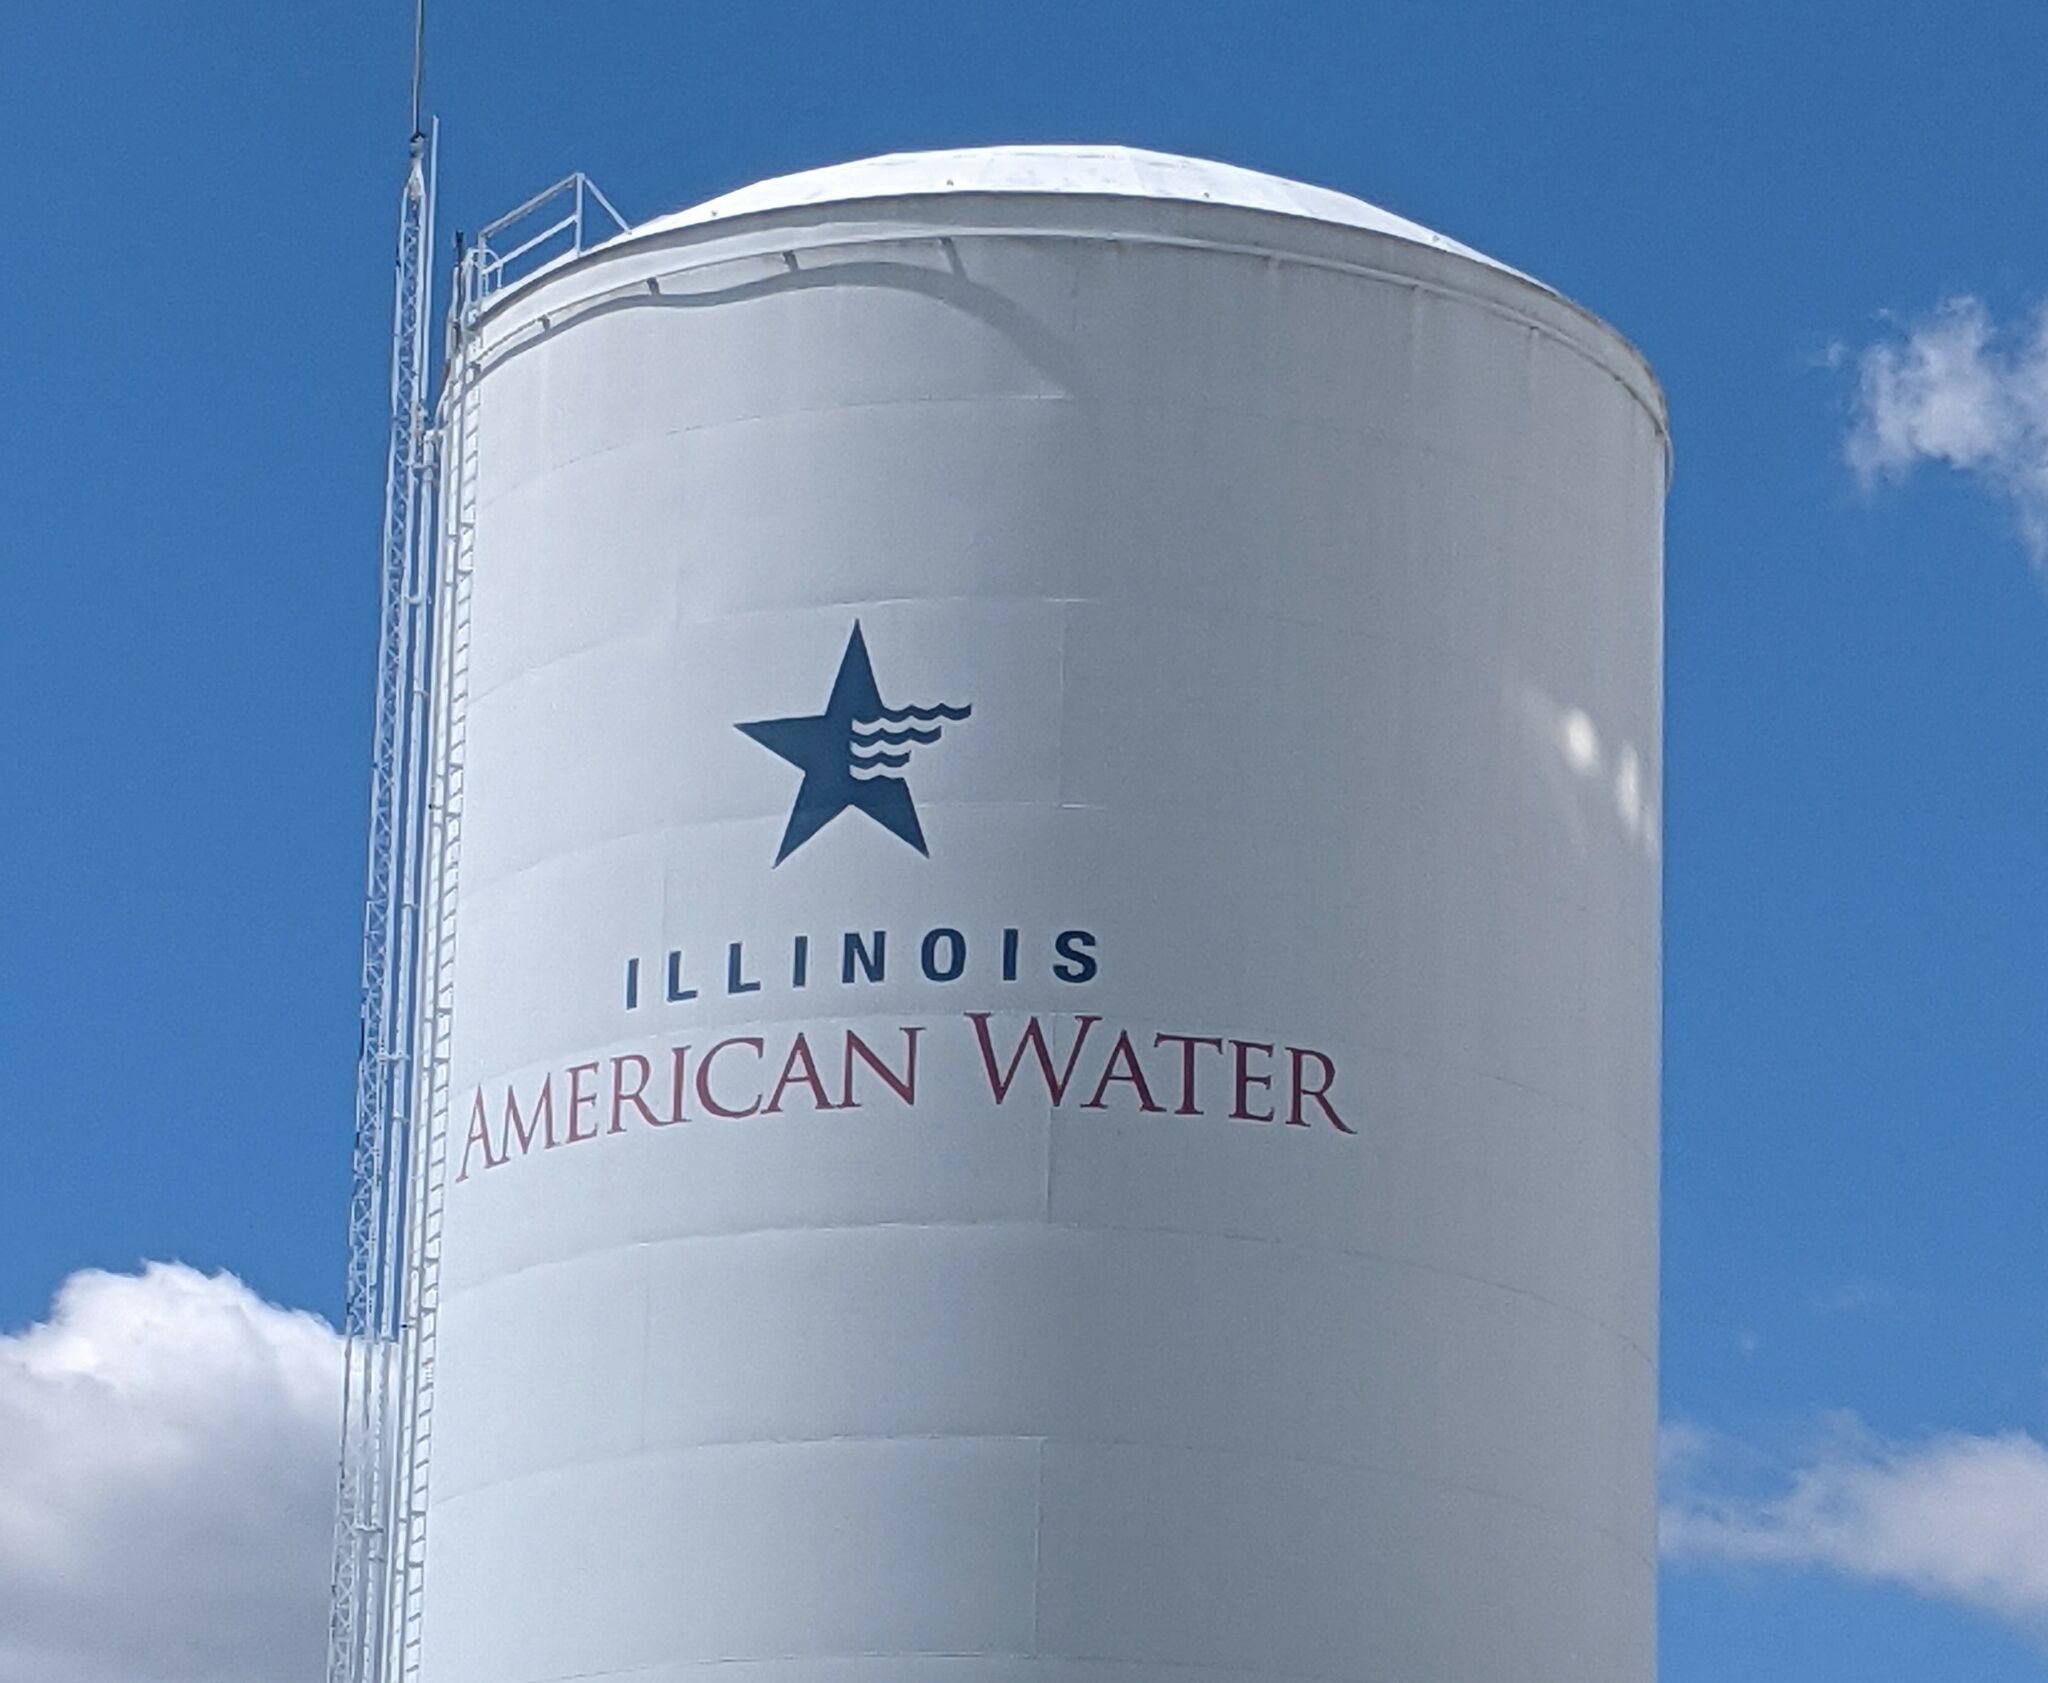  Illinois American Water buys Hardin system for $3.3 million 